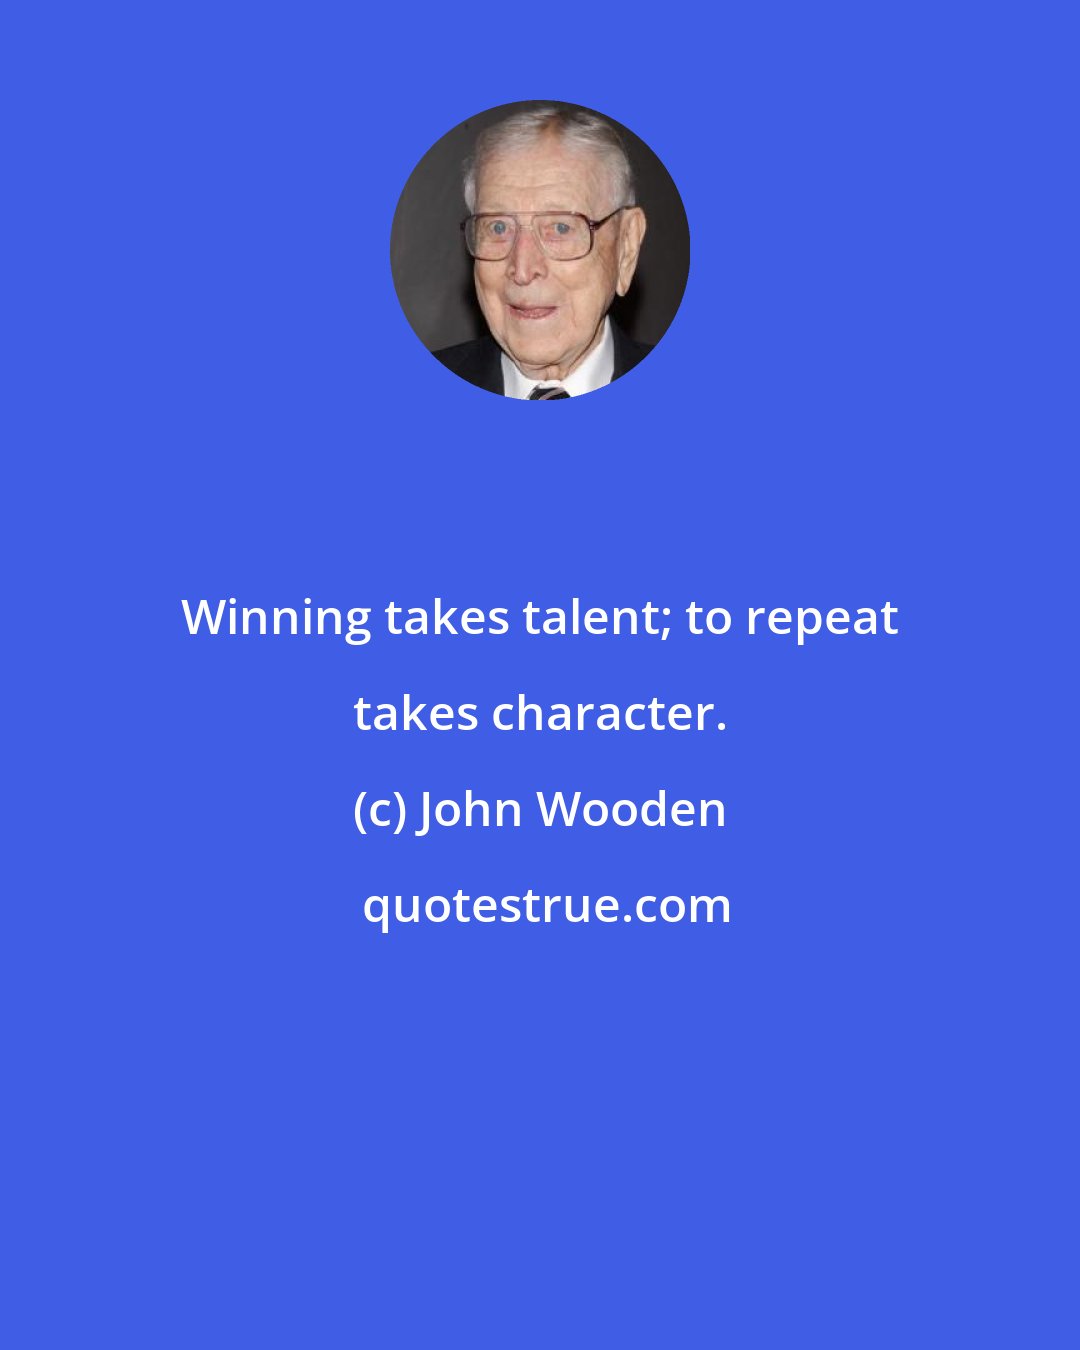 John Wooden: Winning takes talent; to repeat takes character.